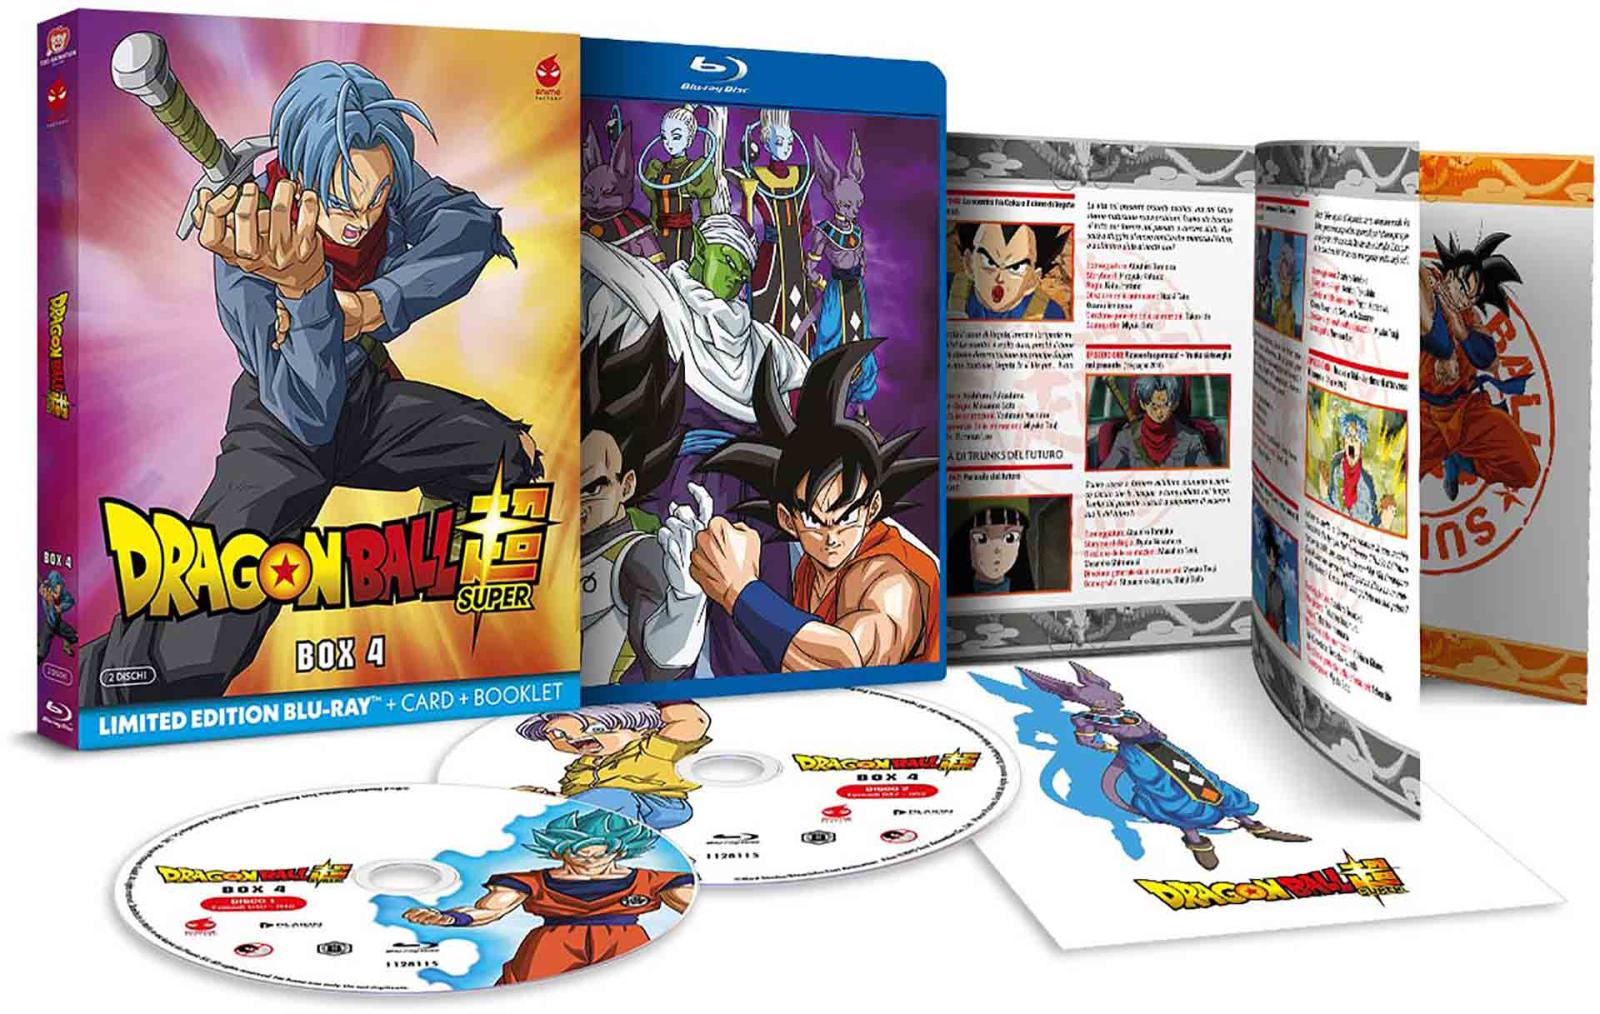 Dragon Ball Super - Volume 4 - Limited Edition 2 Blu-ray + Card + Booklet (Blu-ray) Image 2